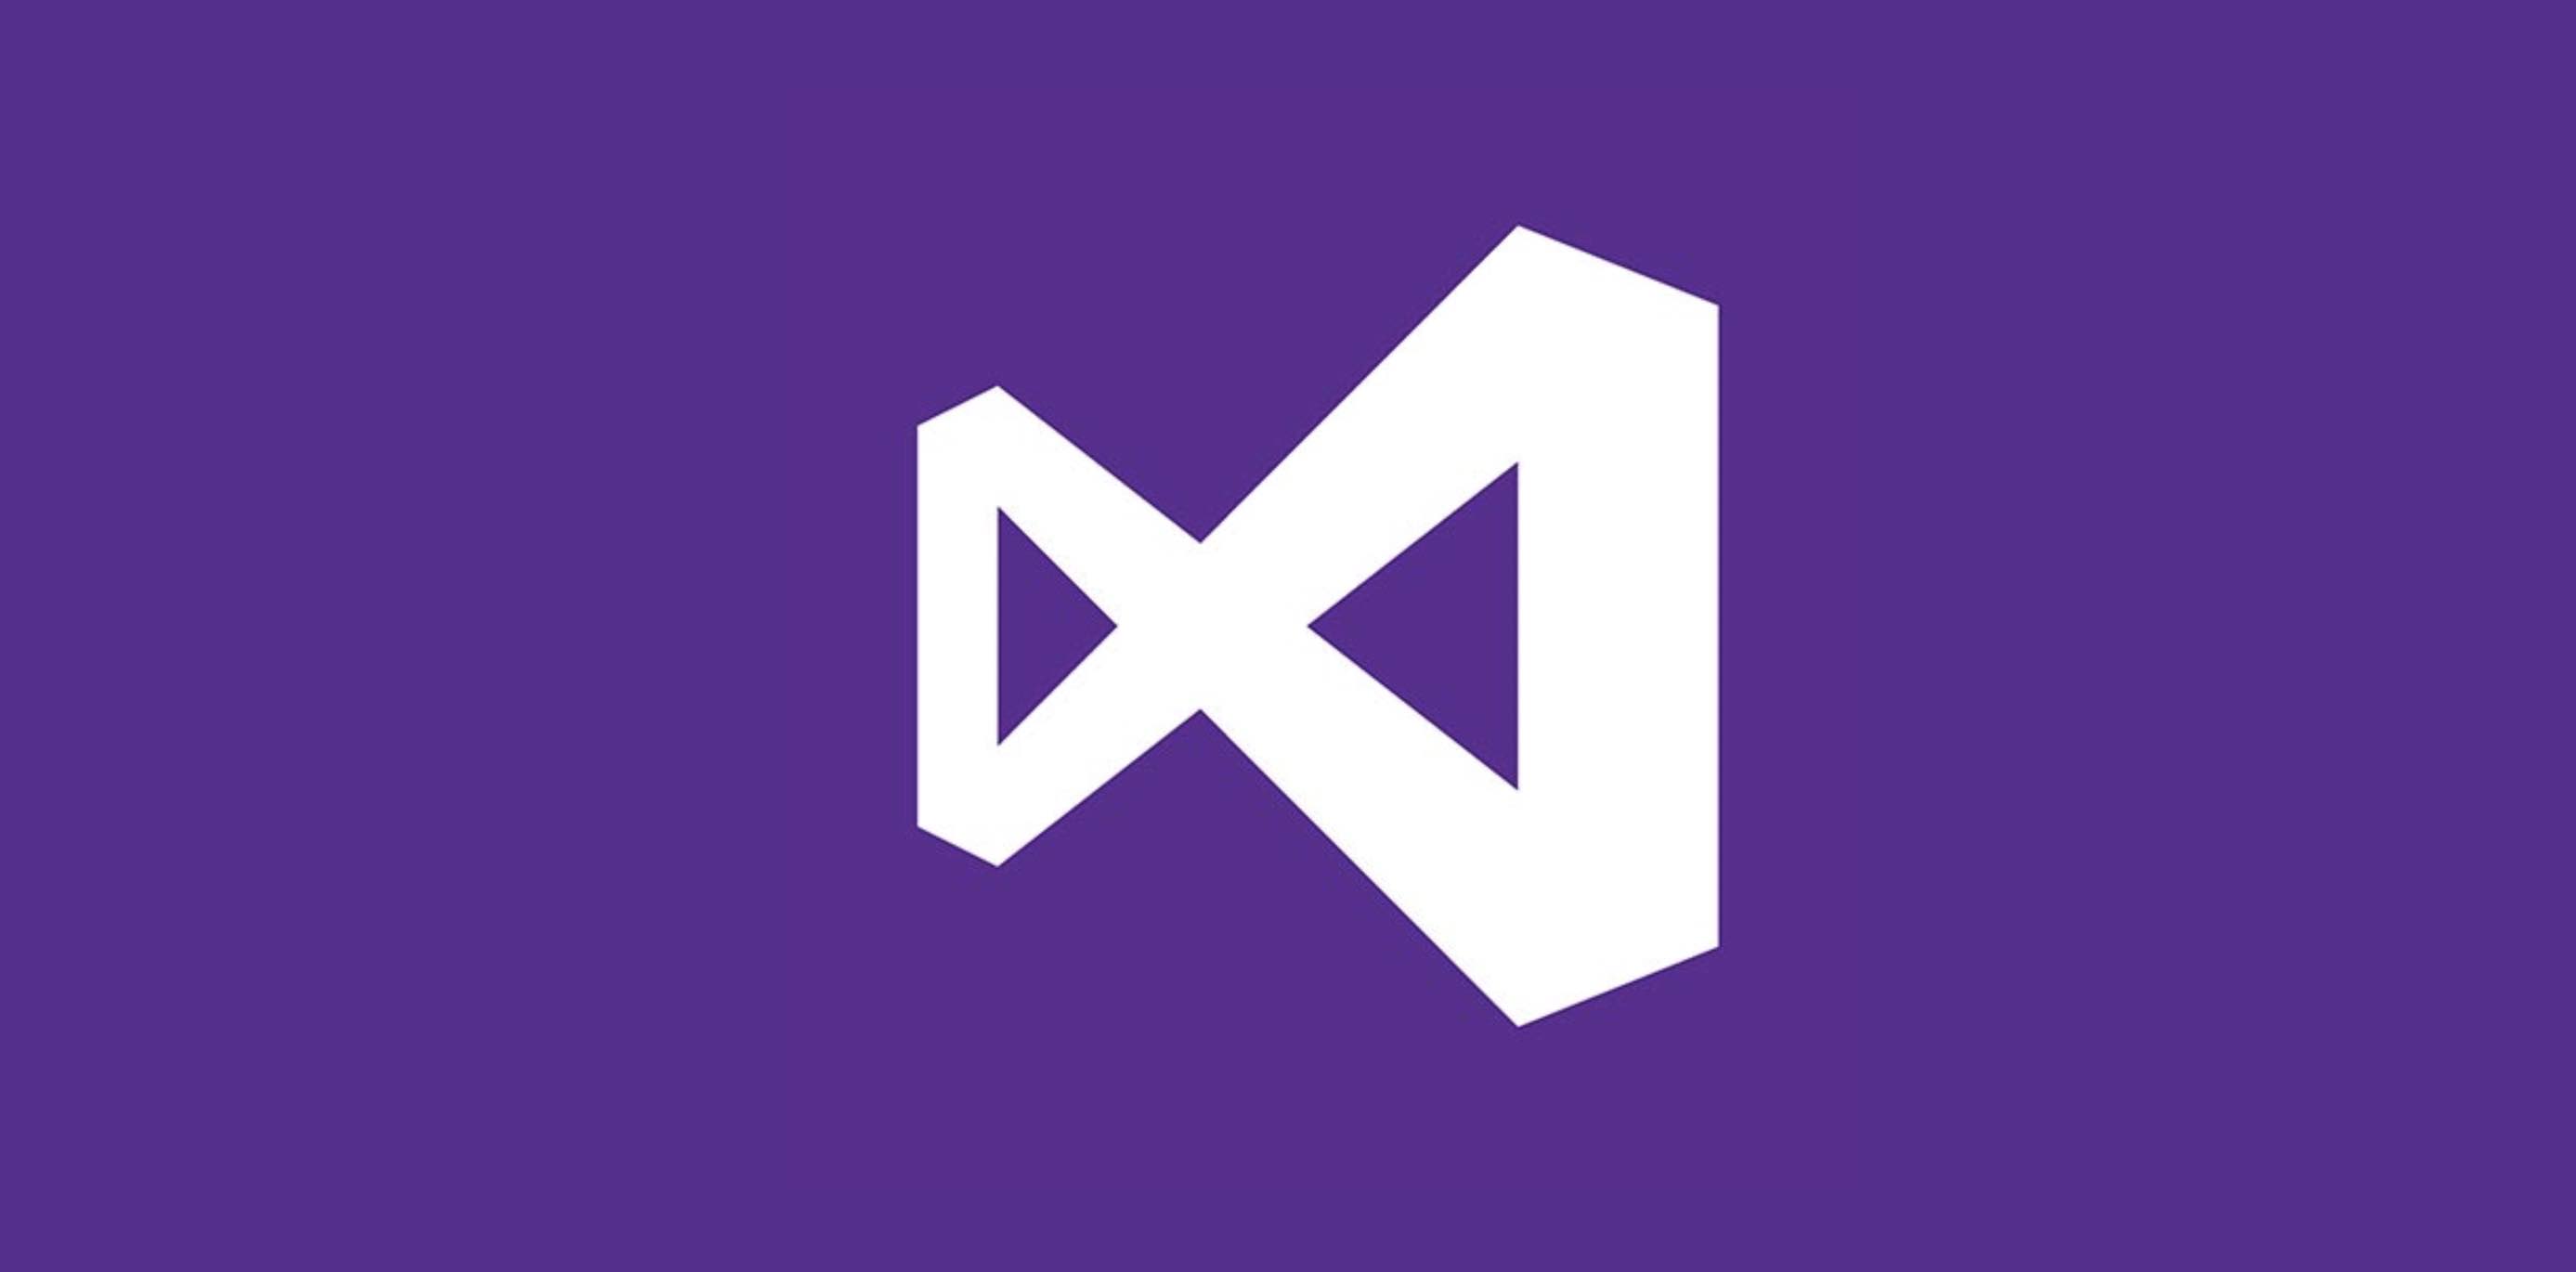 Microsoft is discontinuing Visual Studio for Mac after major overhaul -  9to5Mac